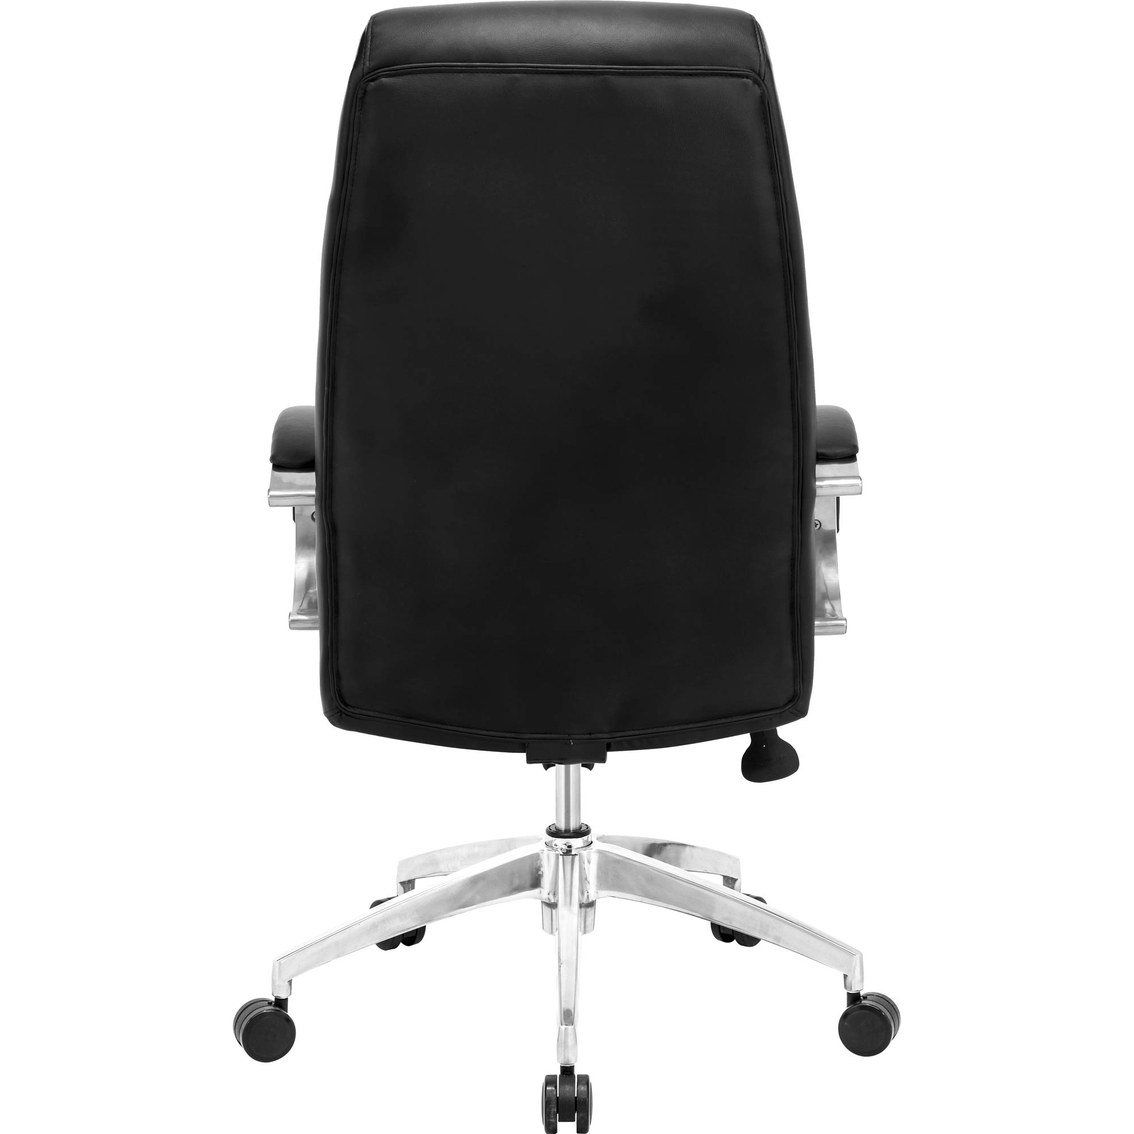 Zuo Lider Comfort Office Chair - Image 2 of 4